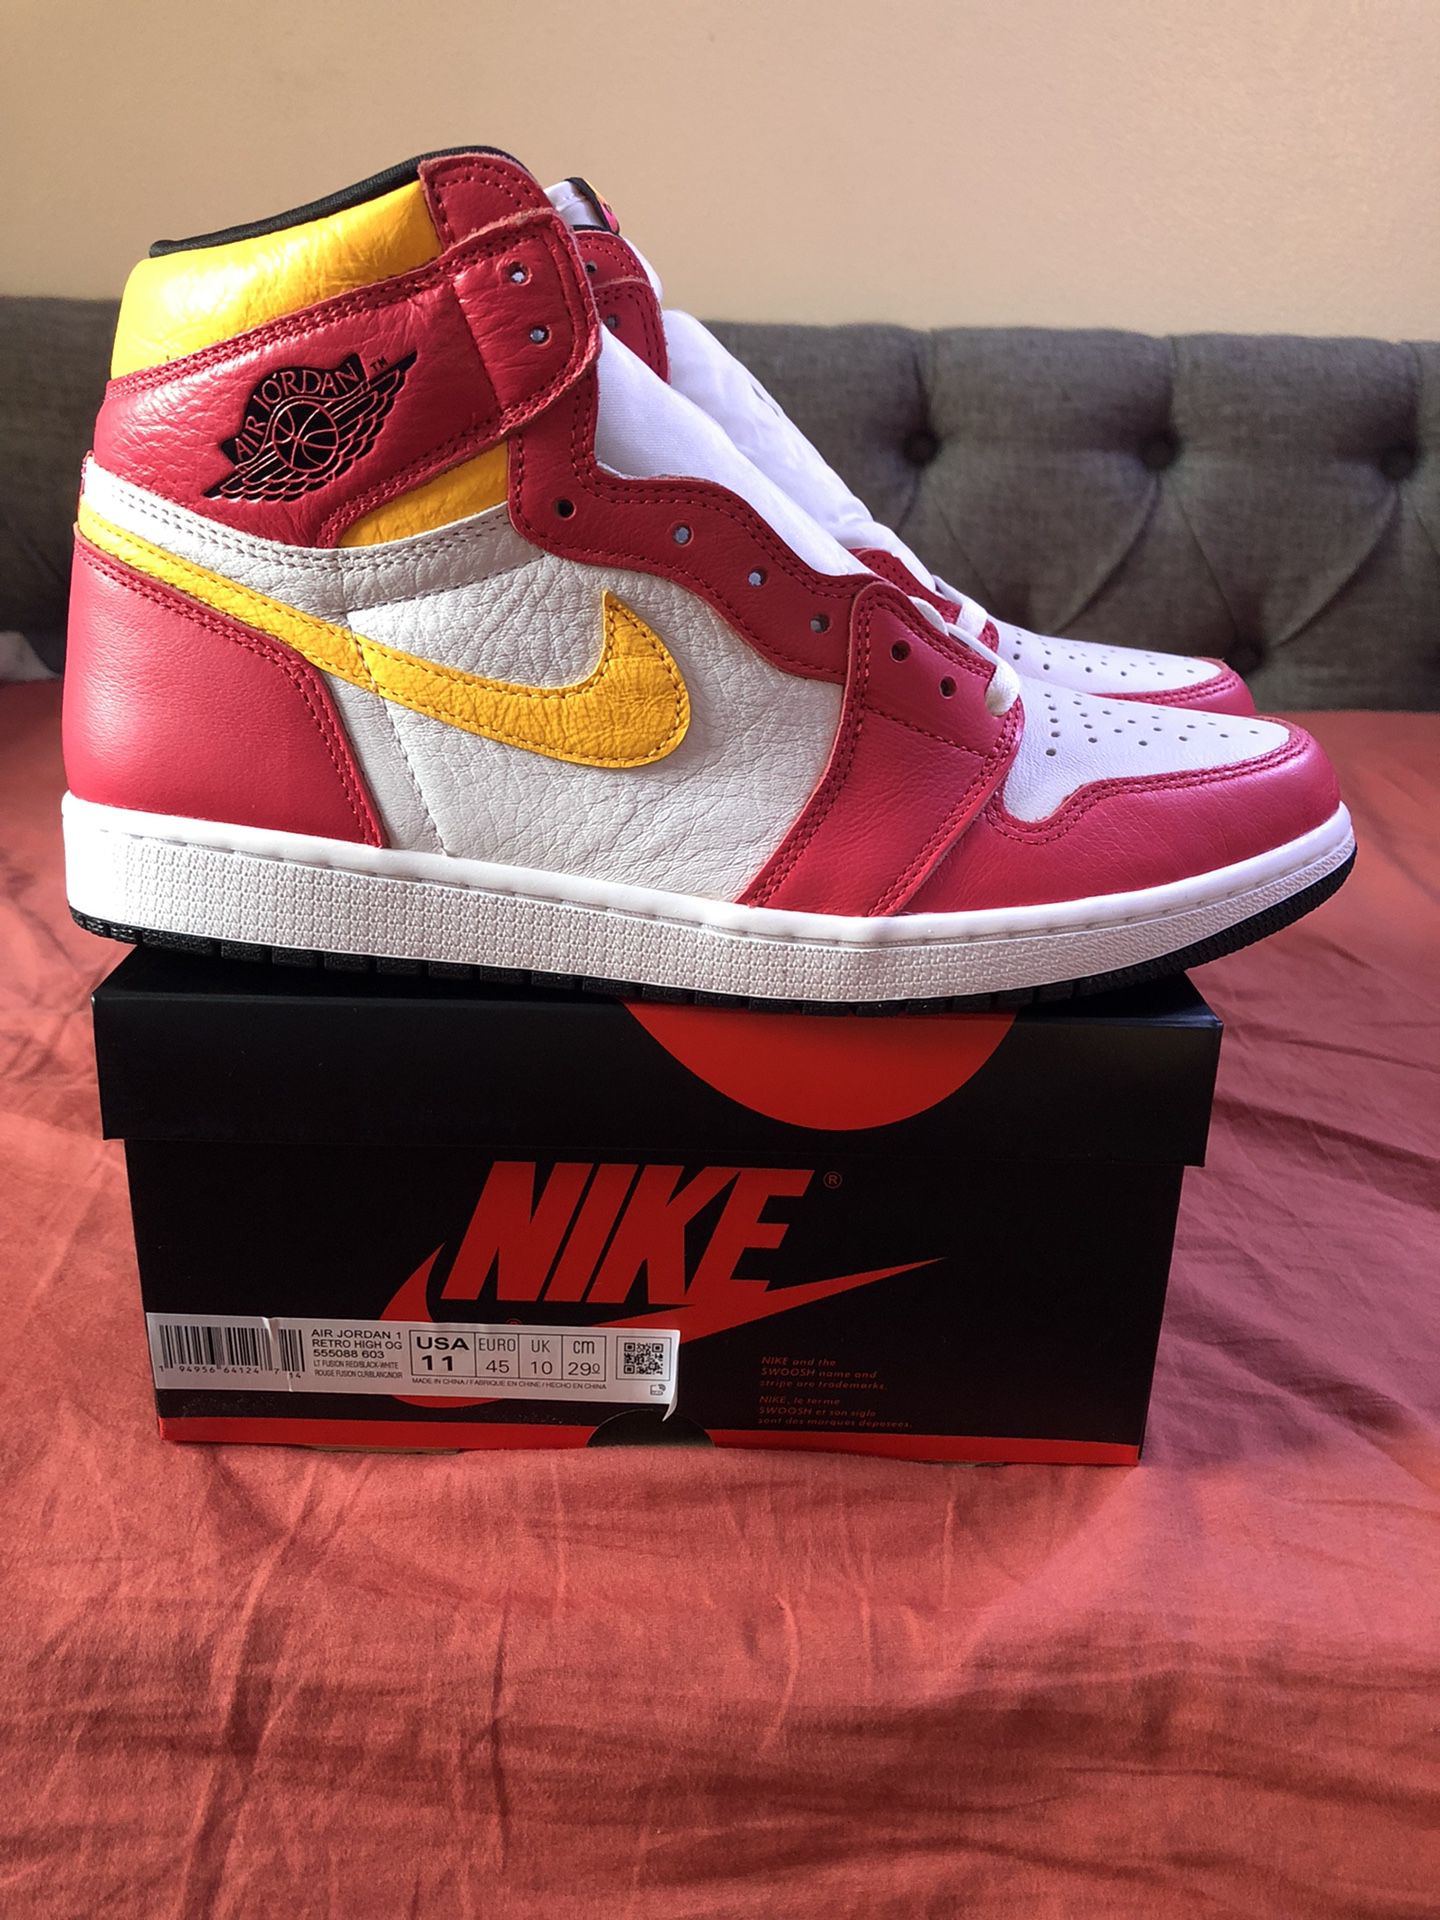 Jordan 1 Red Fusion Size 11 DS $180